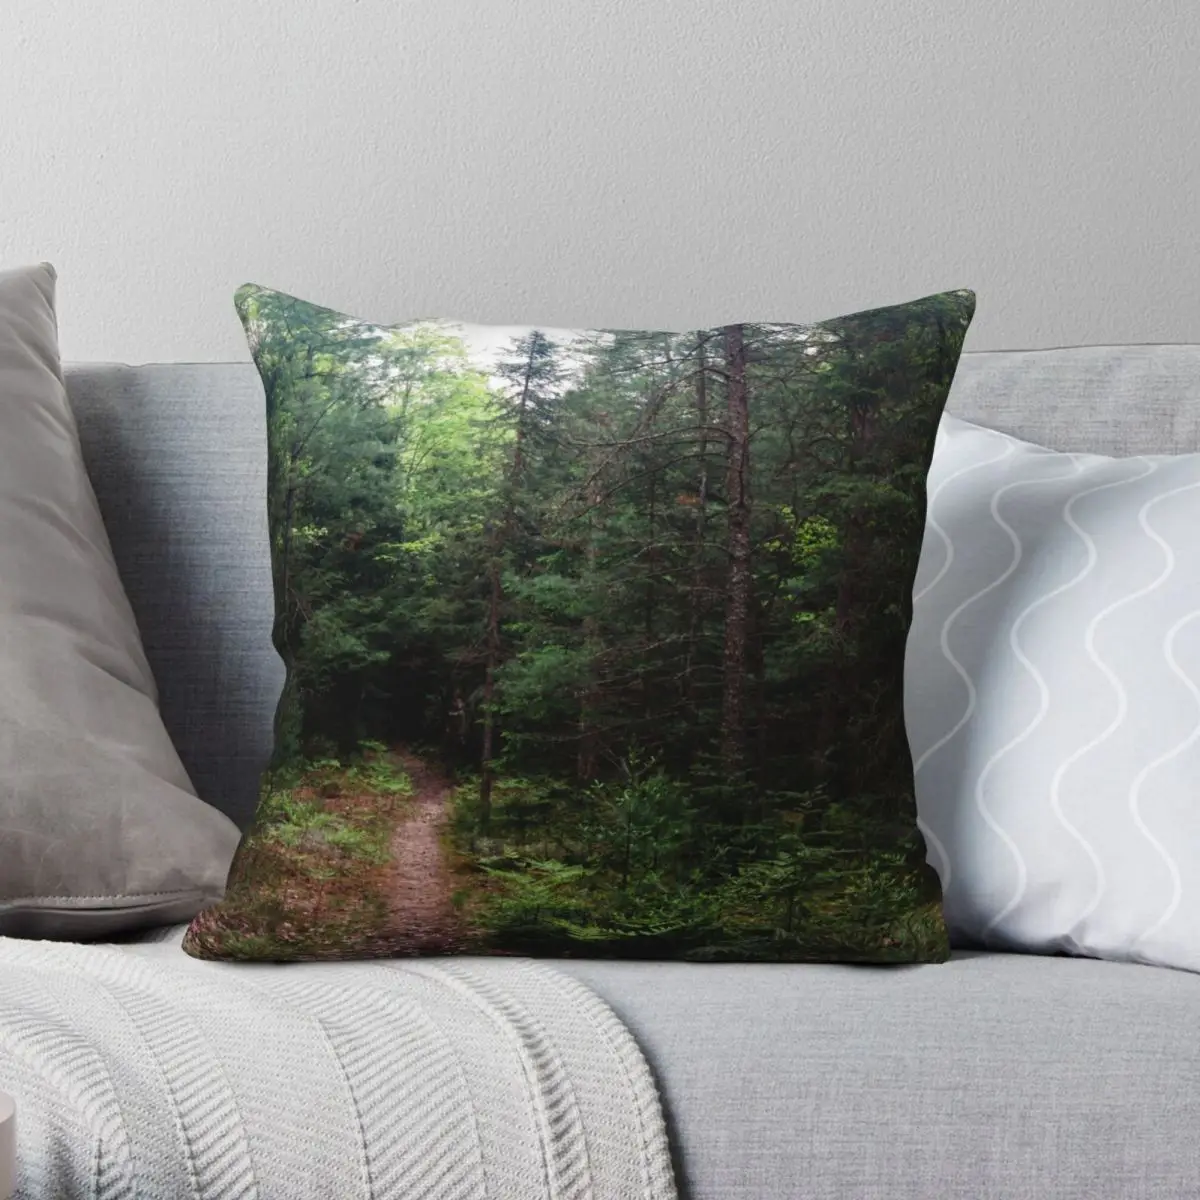 

The North Woods Square Pillowcase Polyester Linen Velvet Creative Zip Decorative Throw Pillow Case Sofa Cushion Cover